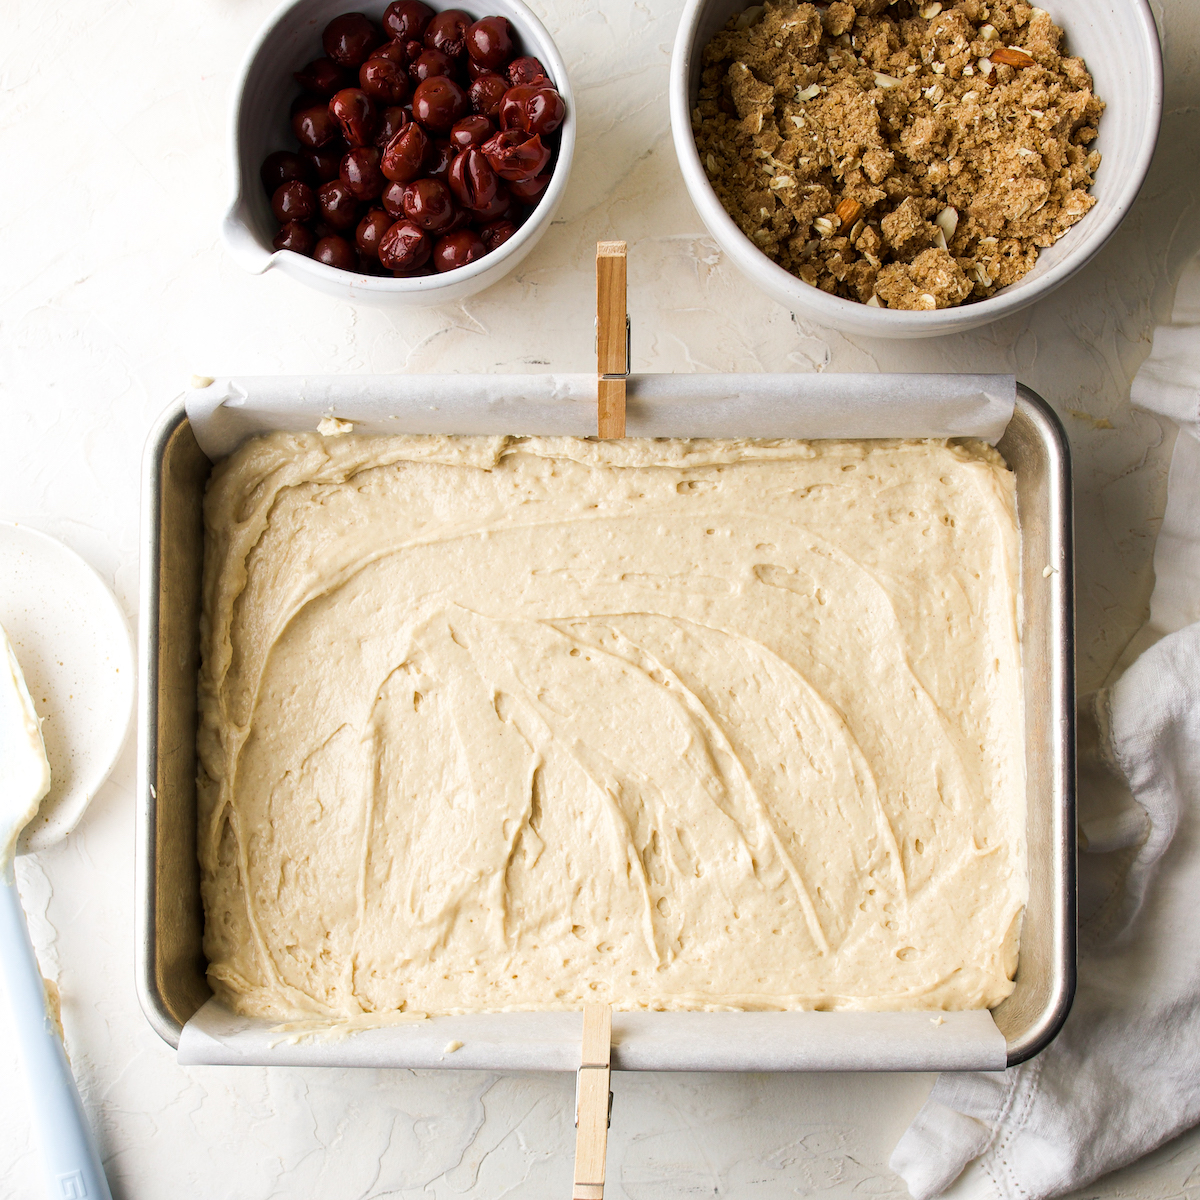 A pan of cake batter next to a bowl of cherries and a bowl of streusel.